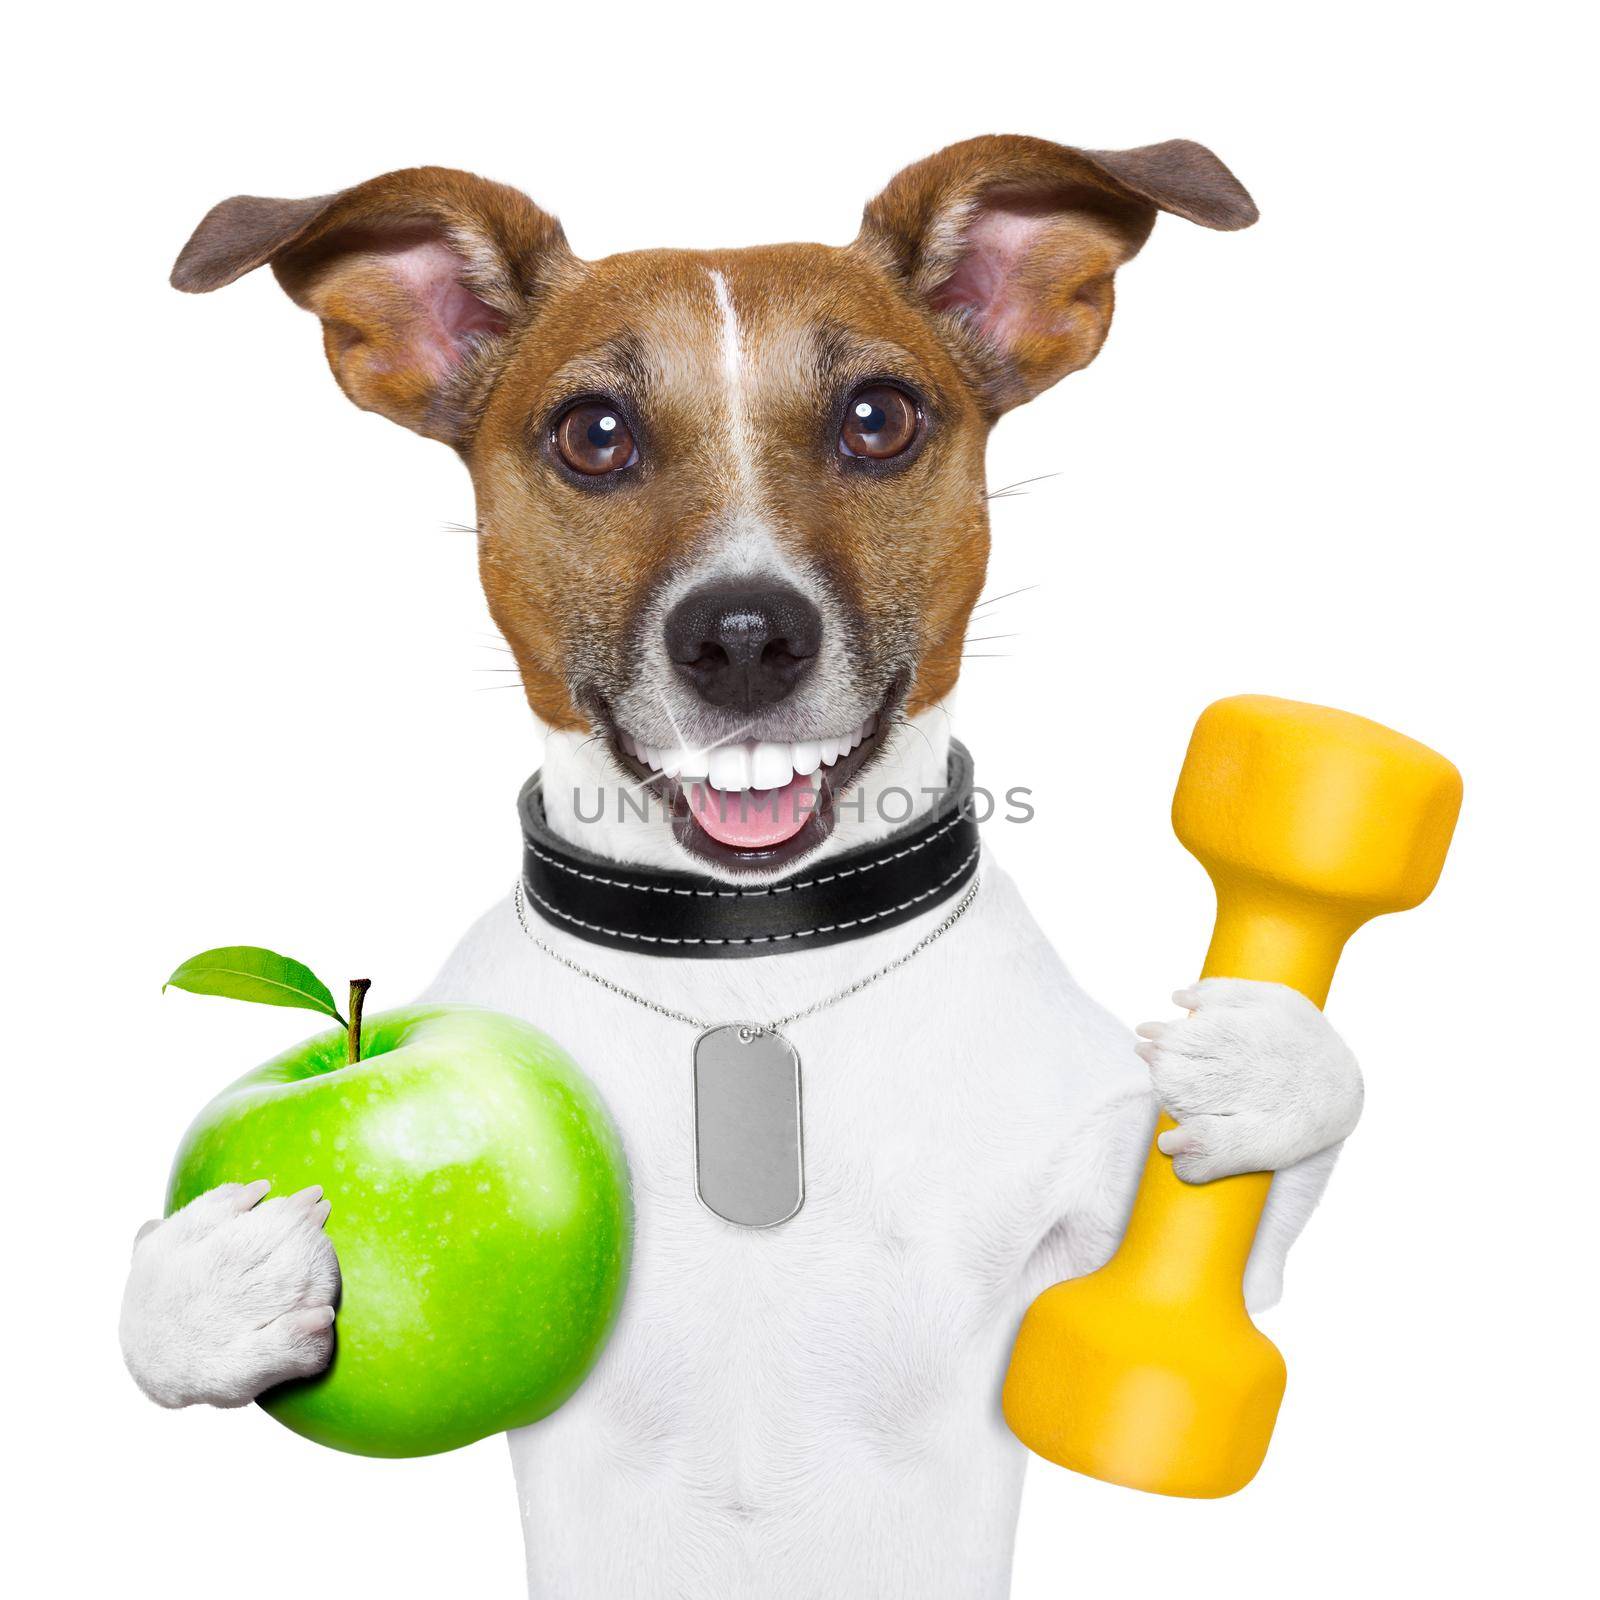 fitness and healthy dog by Brosch